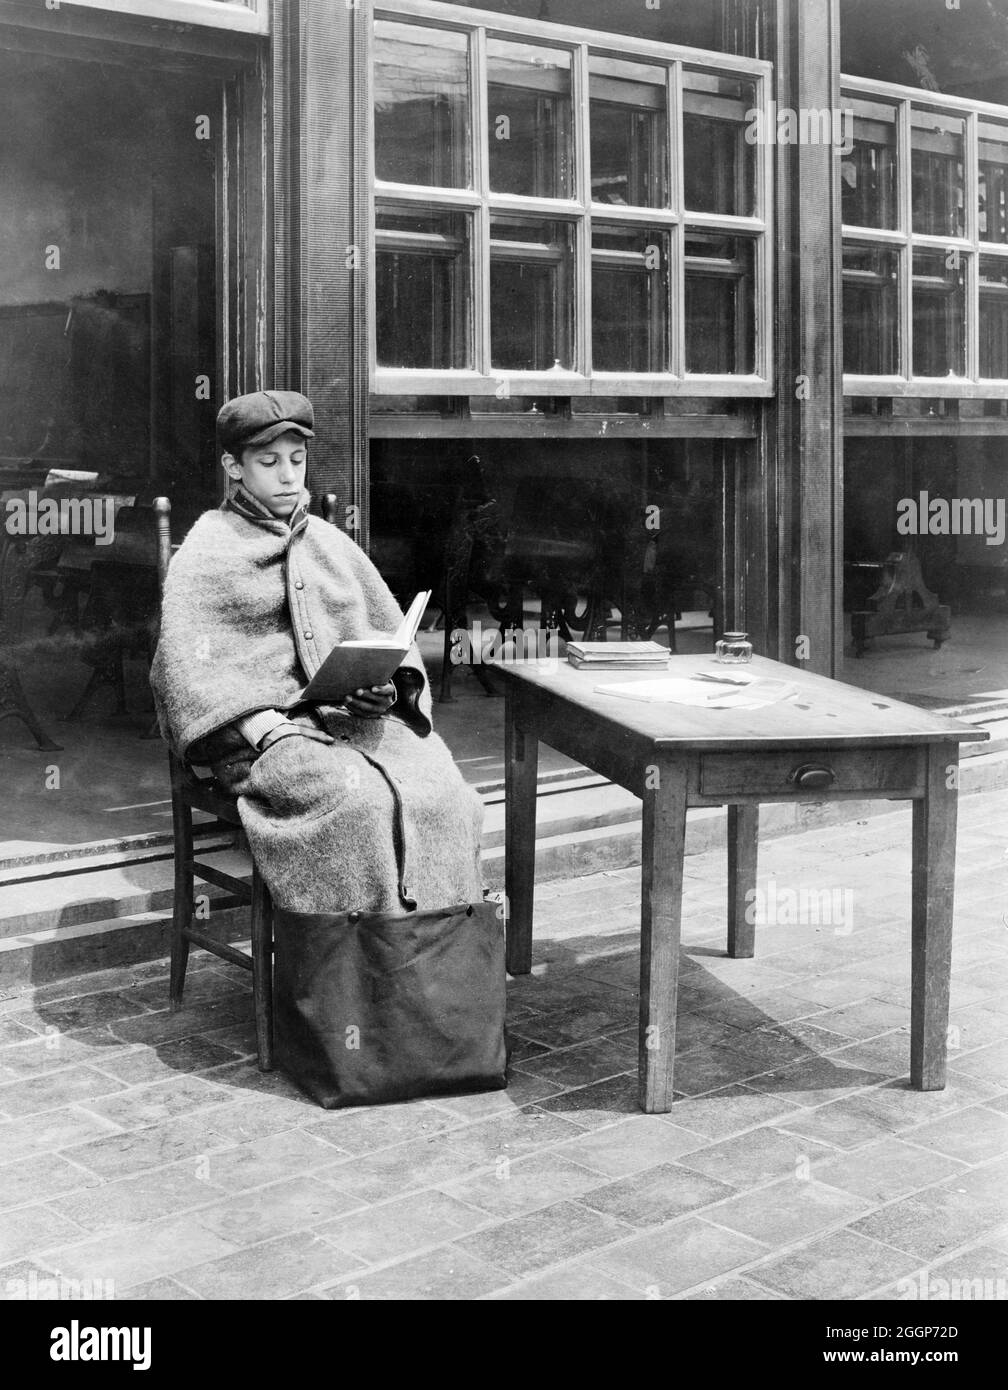 A boy wearing a Huyck brand sitting-out bag (a coat with a bag attached to the bottom) to stay warm in an open air school in New York, 1918, at the time of the Spanish Flu pandemicirca Photographed by Jessie Tarbox Beals. Stock Photo